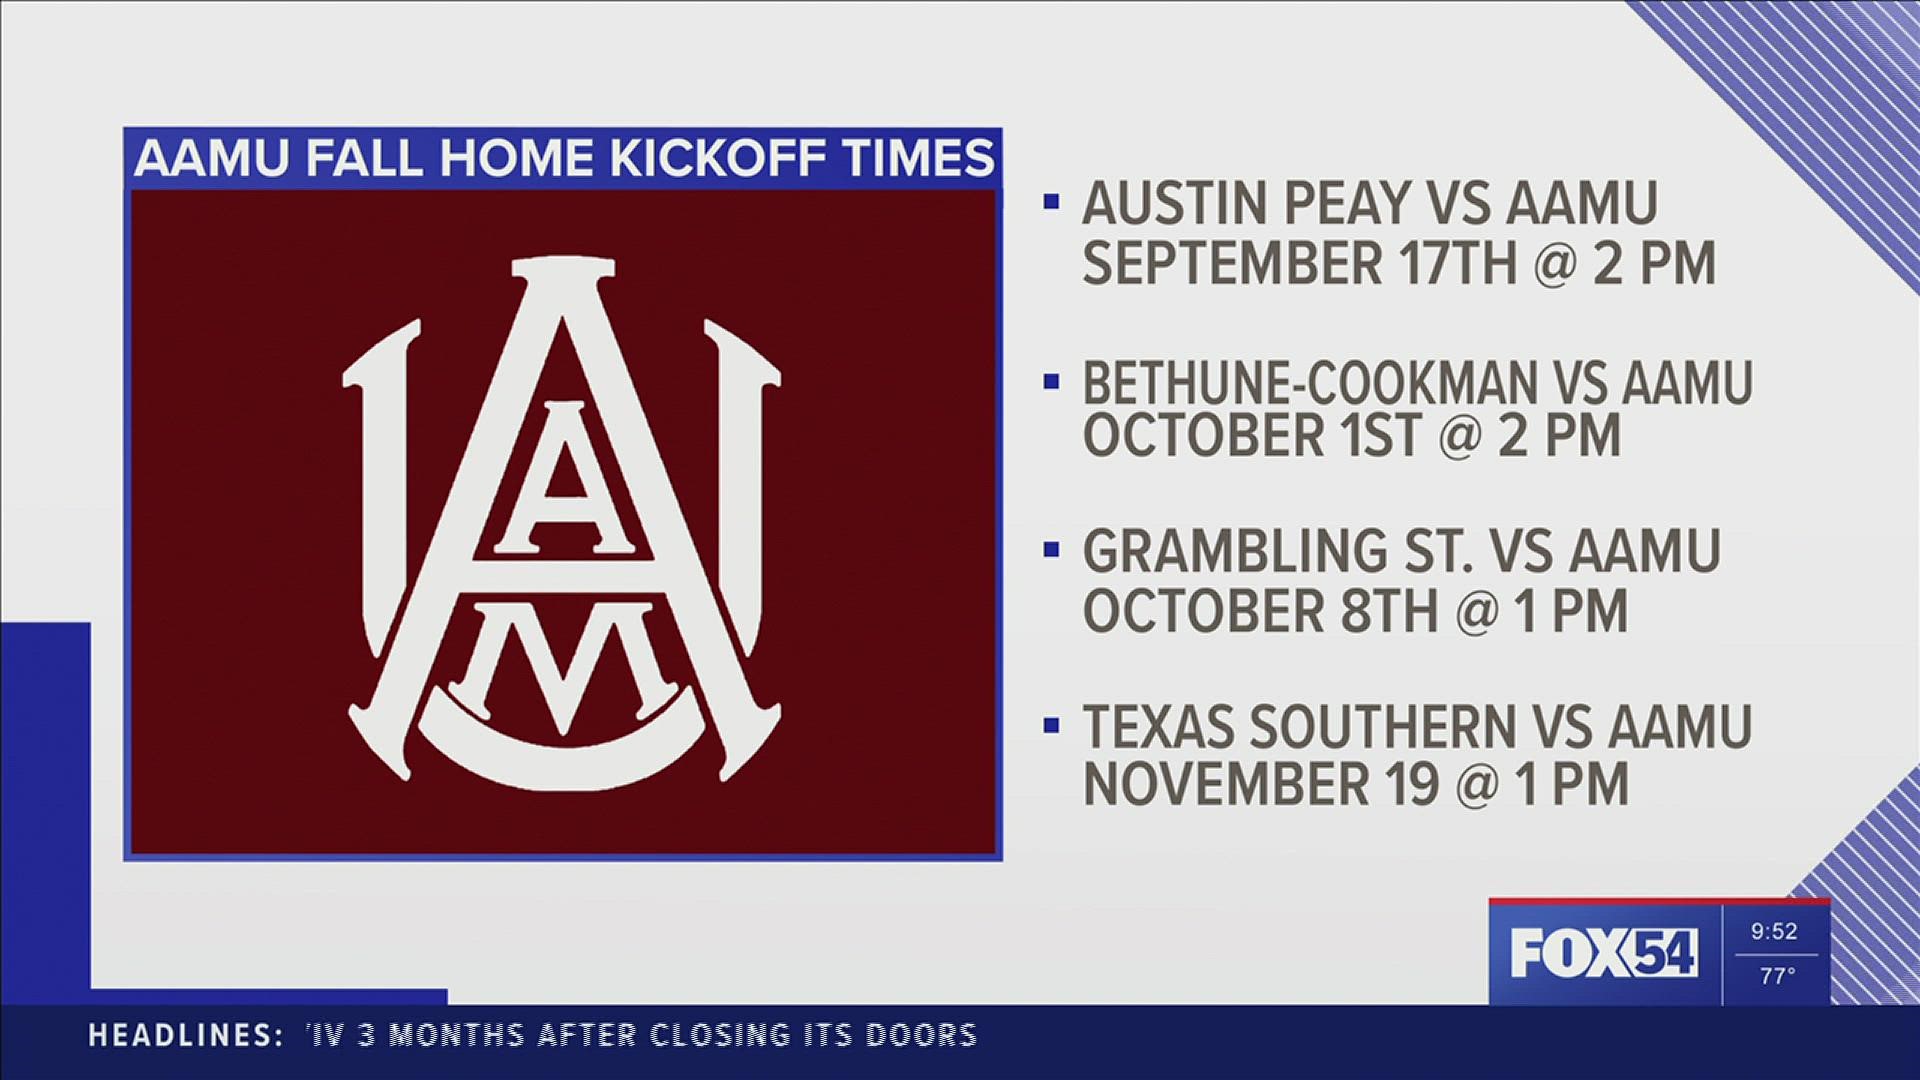 Alabama A&M will play four games at home in 2022. The contests against Austin Peay & Bethune-Cookman start at 2 PM. The Grambling & Texas Southern games start at 1.